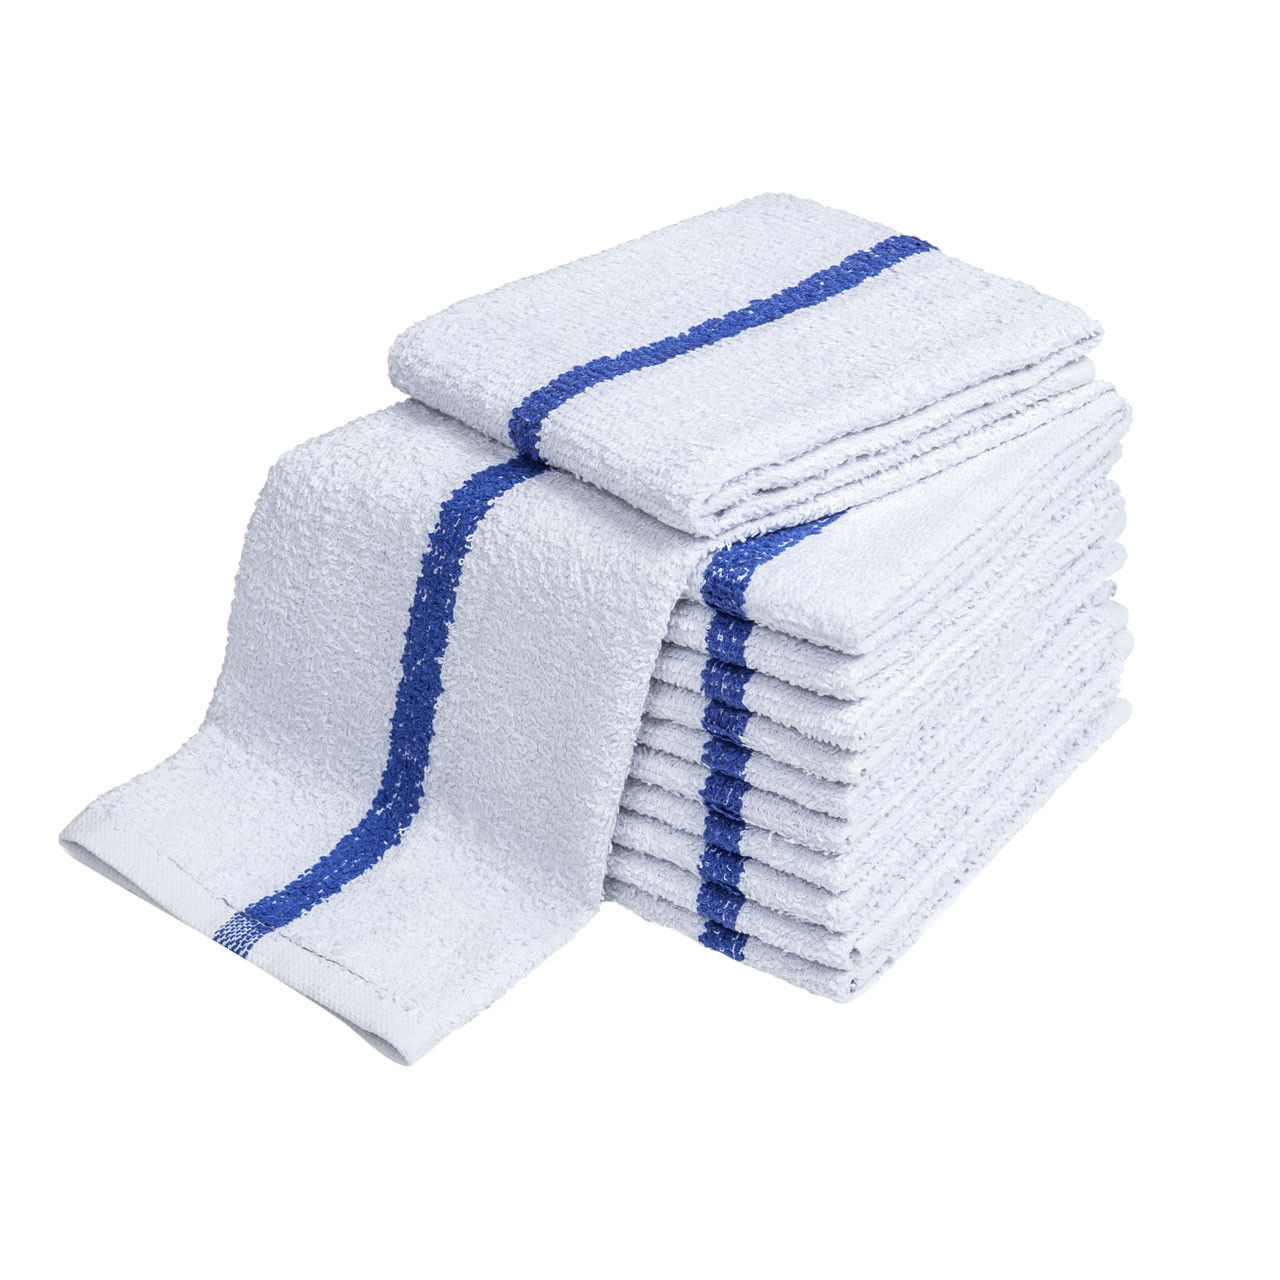 How big are these ADI Full Terry, Center Stripe bar towels?